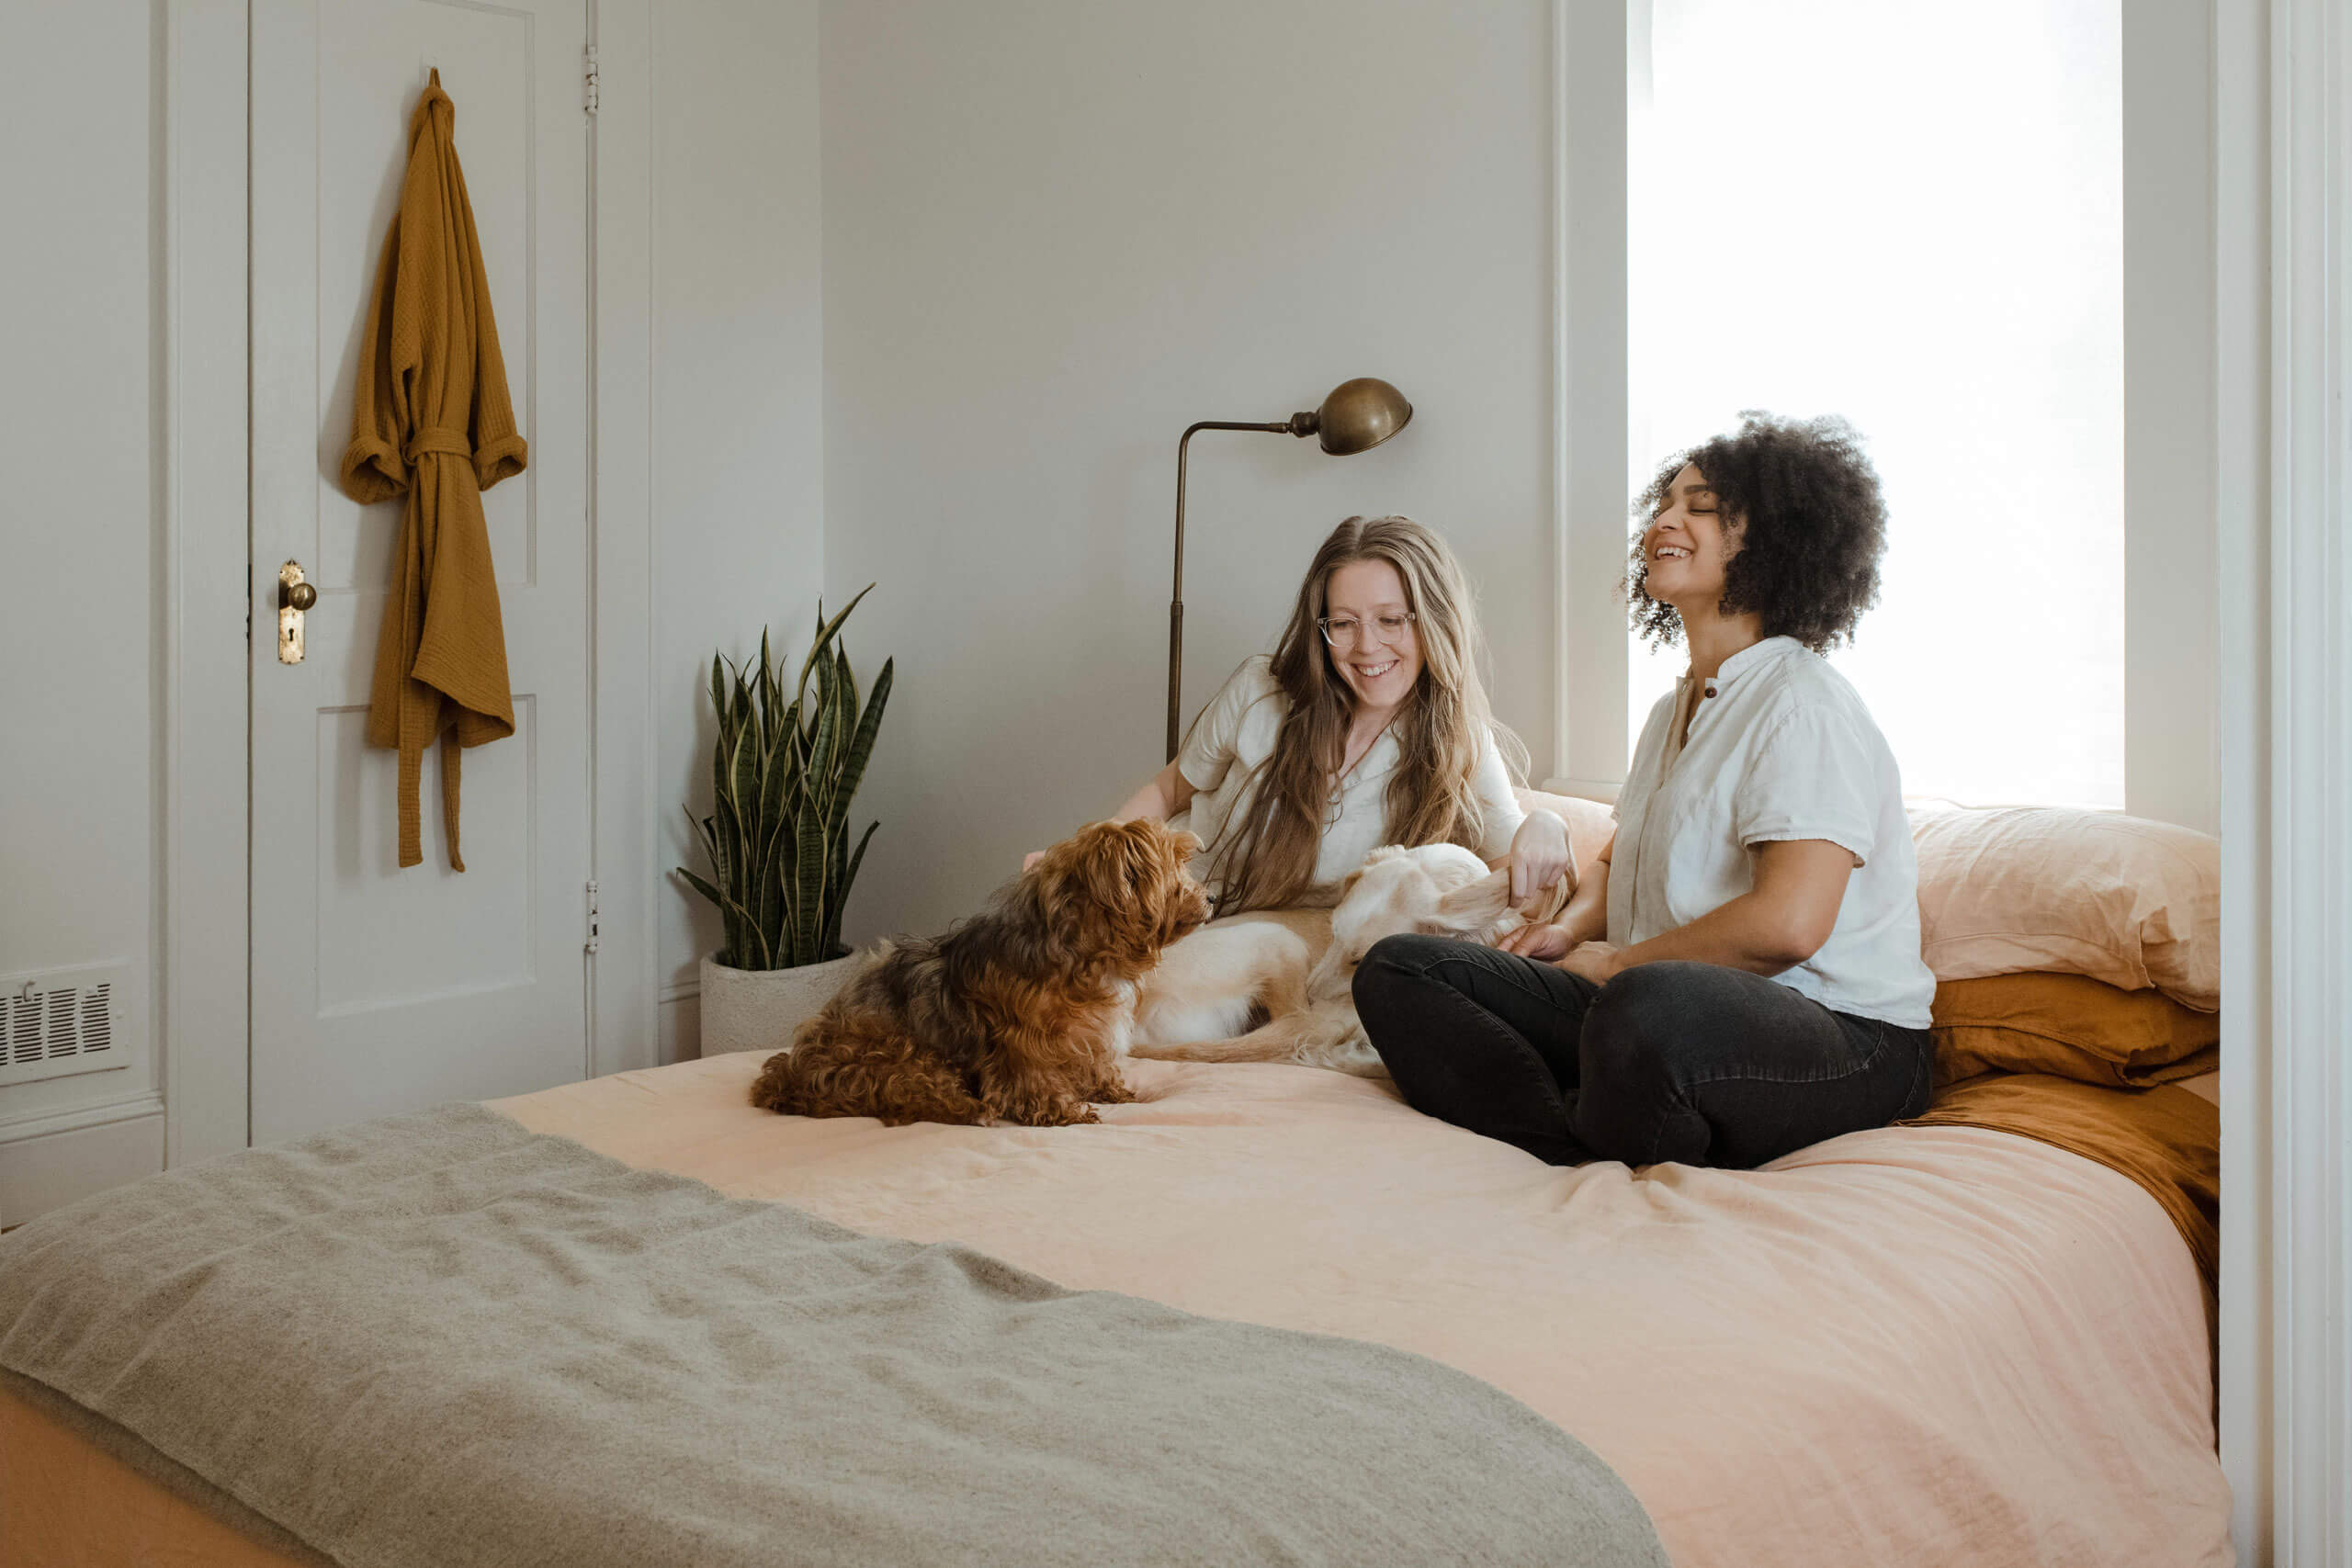 Dog on a bed with two women